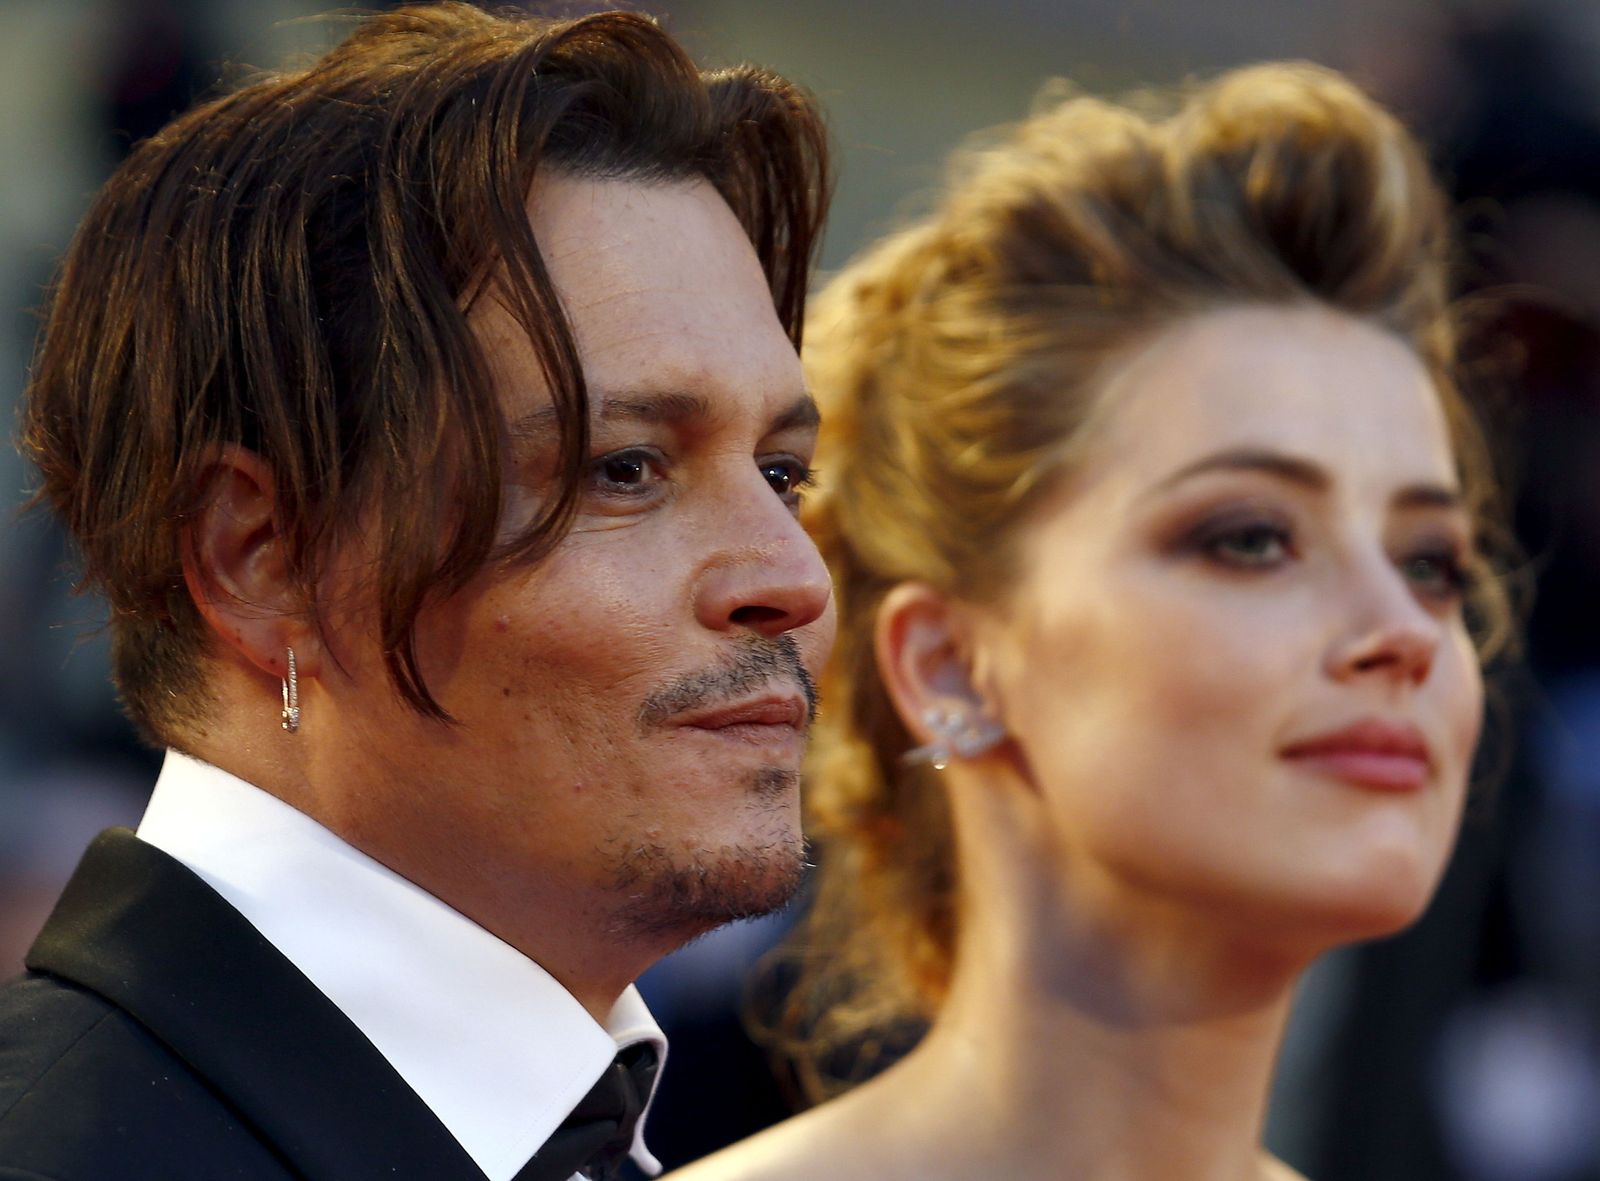 FILE PHOTO: Actress Amber Heard and her husband Johnny Depp attend the red carpet event for the movie 